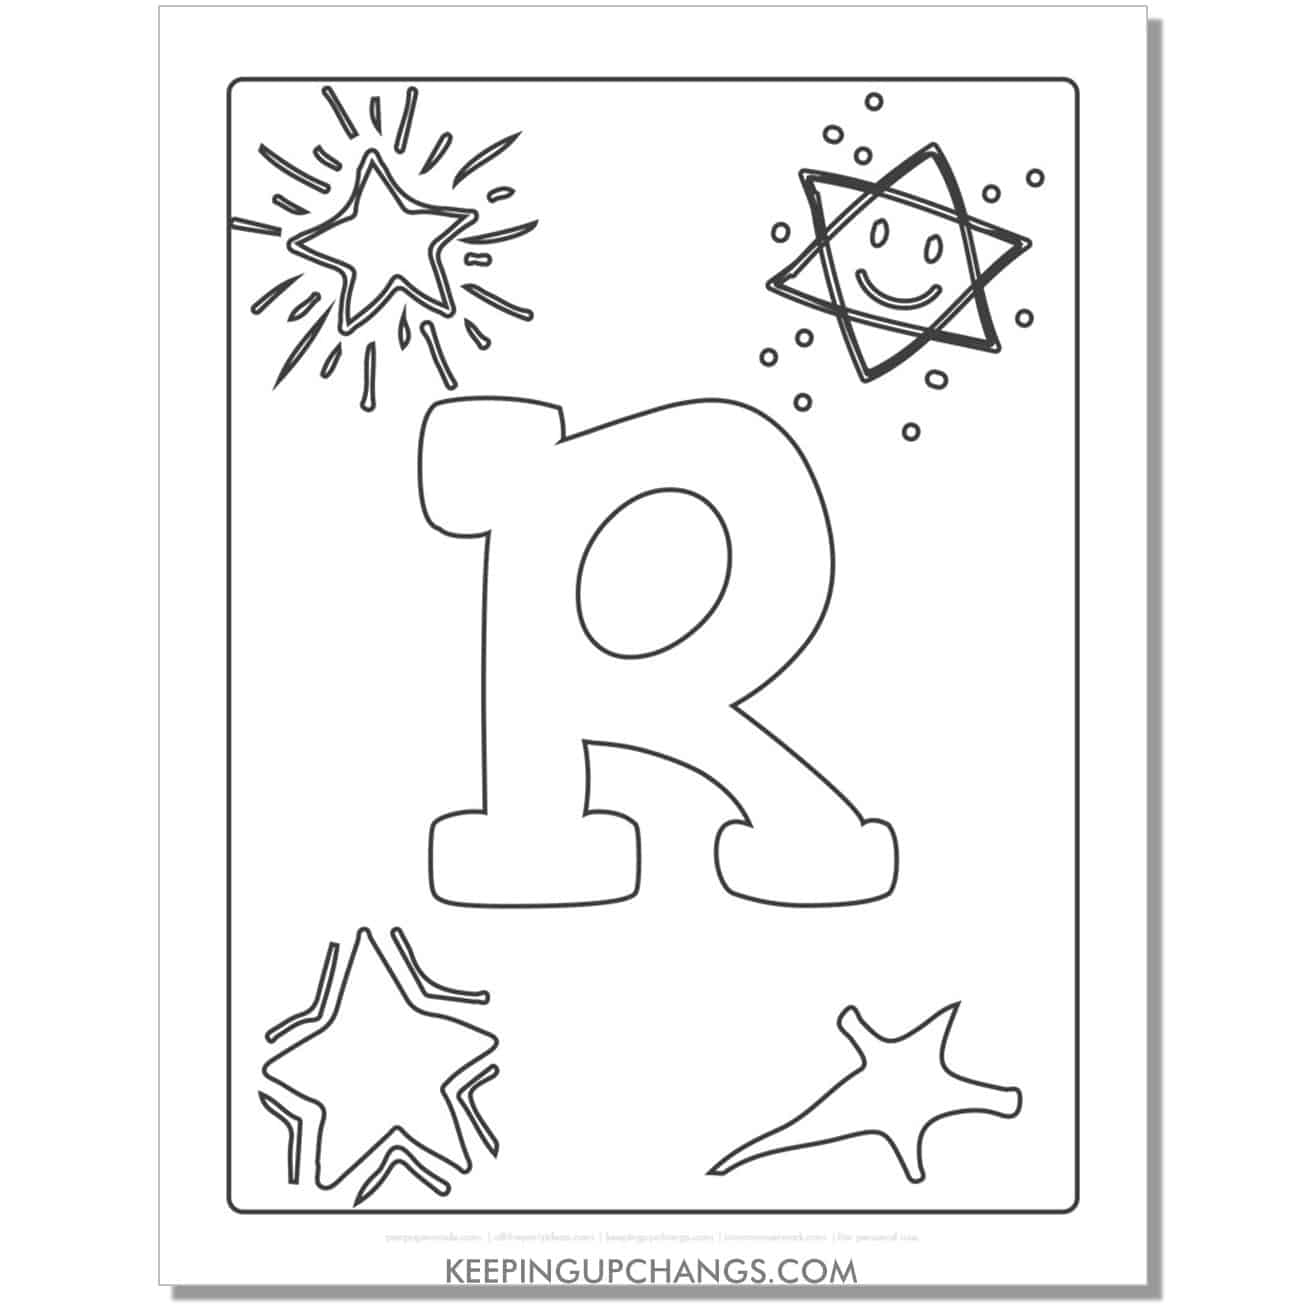 cool letter r to color with stars, space theme.